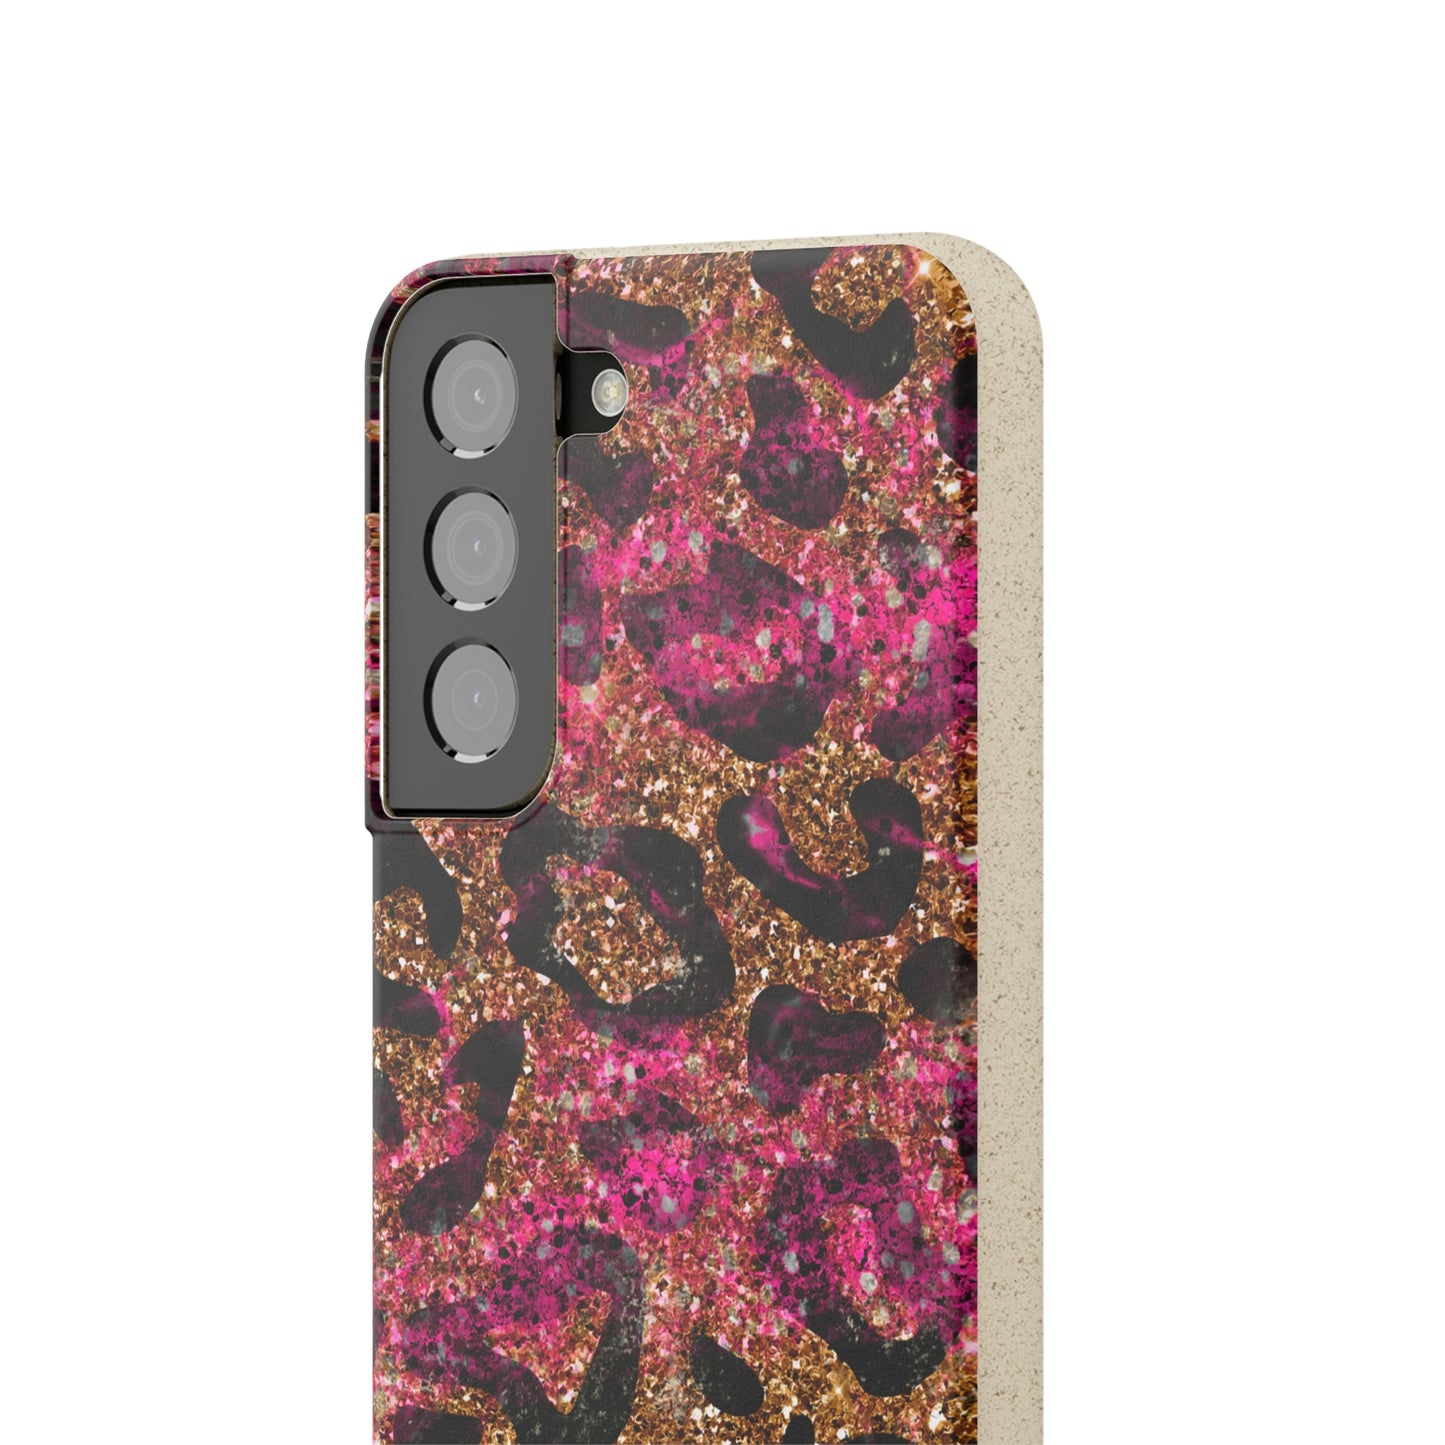 Animal Print Eco-Friendly Biodegradable Phone Case: Protect Your Device & the Planet"